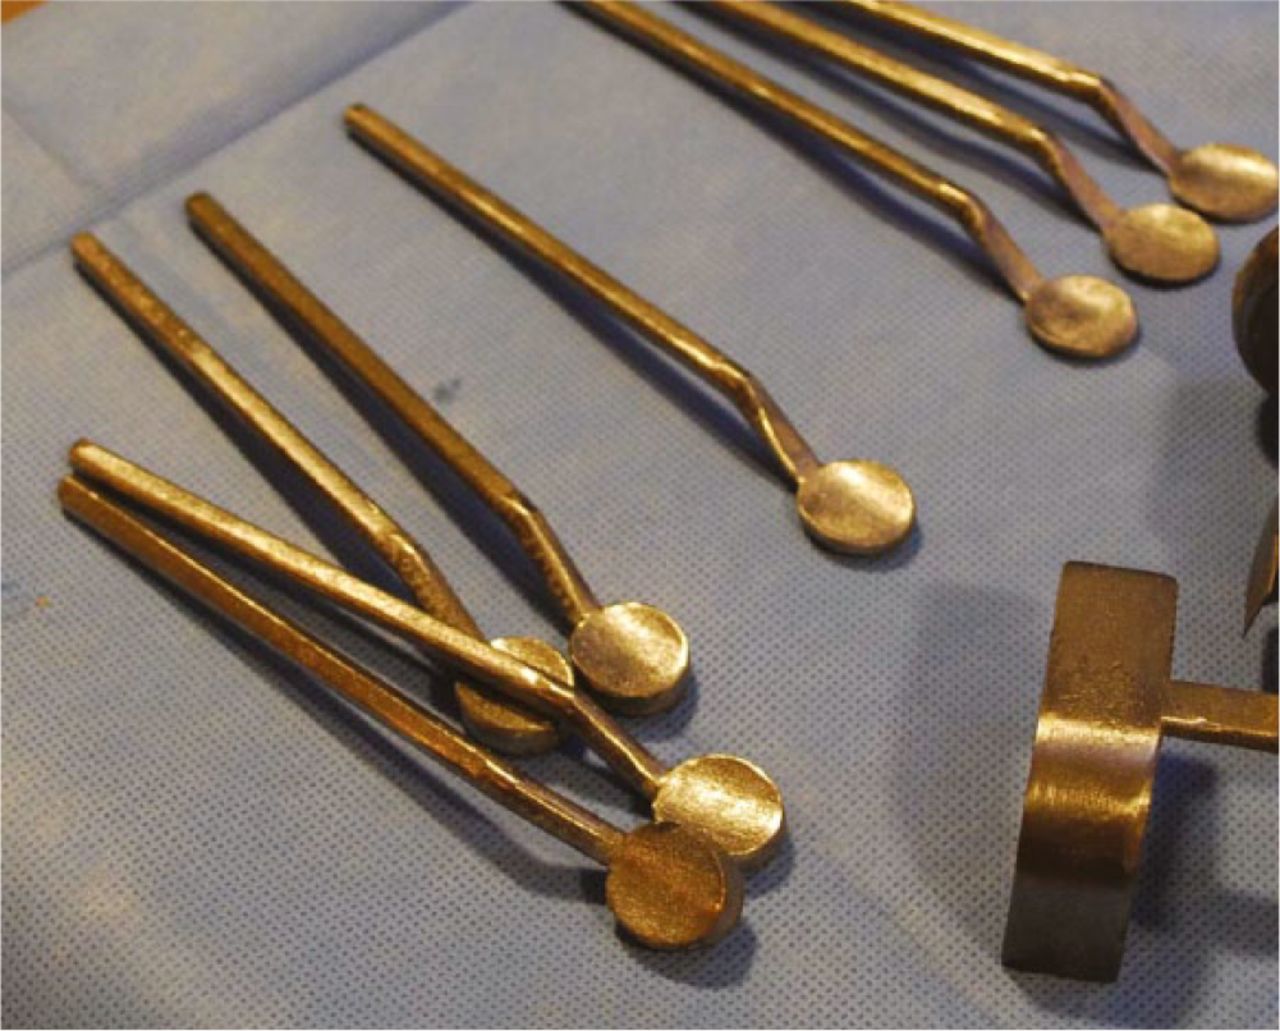 Fig. 14 
          ADVANTicS technique joint gap guides in a selection of thicknesses are introduced into the joint space vacated by eroded articular cartilage. The surgeon can ‘fine tune’ the tension in each compartment and identify the joint line from which resections are measured.
        